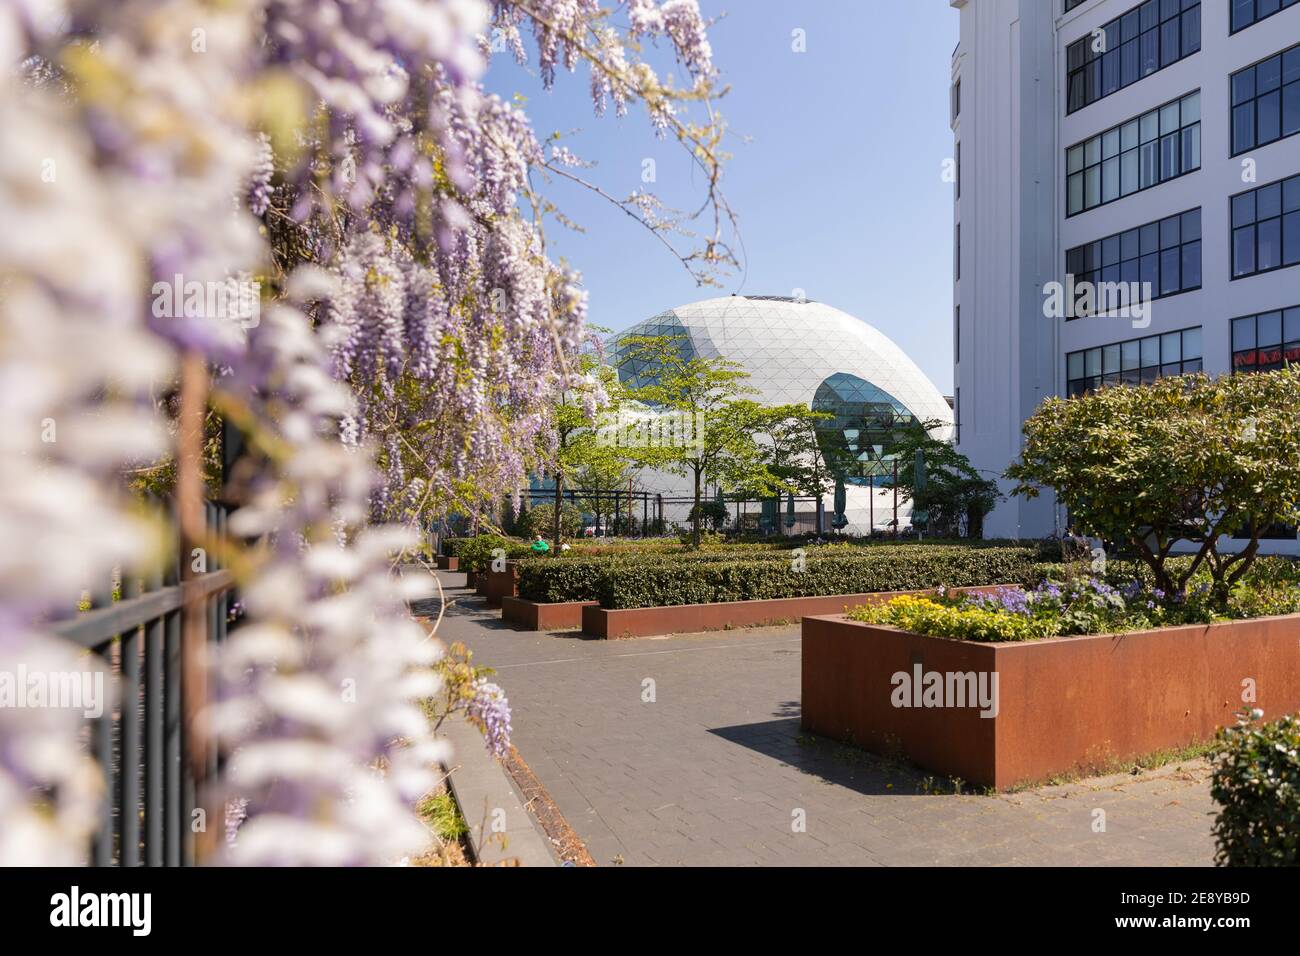 Eindhoven, The Netherlands, April 21st 2020. The famous ’Blob’ building designed by Massimiliano Fuksas surrounded by a greenery and blossoms at a ter Stock Photo